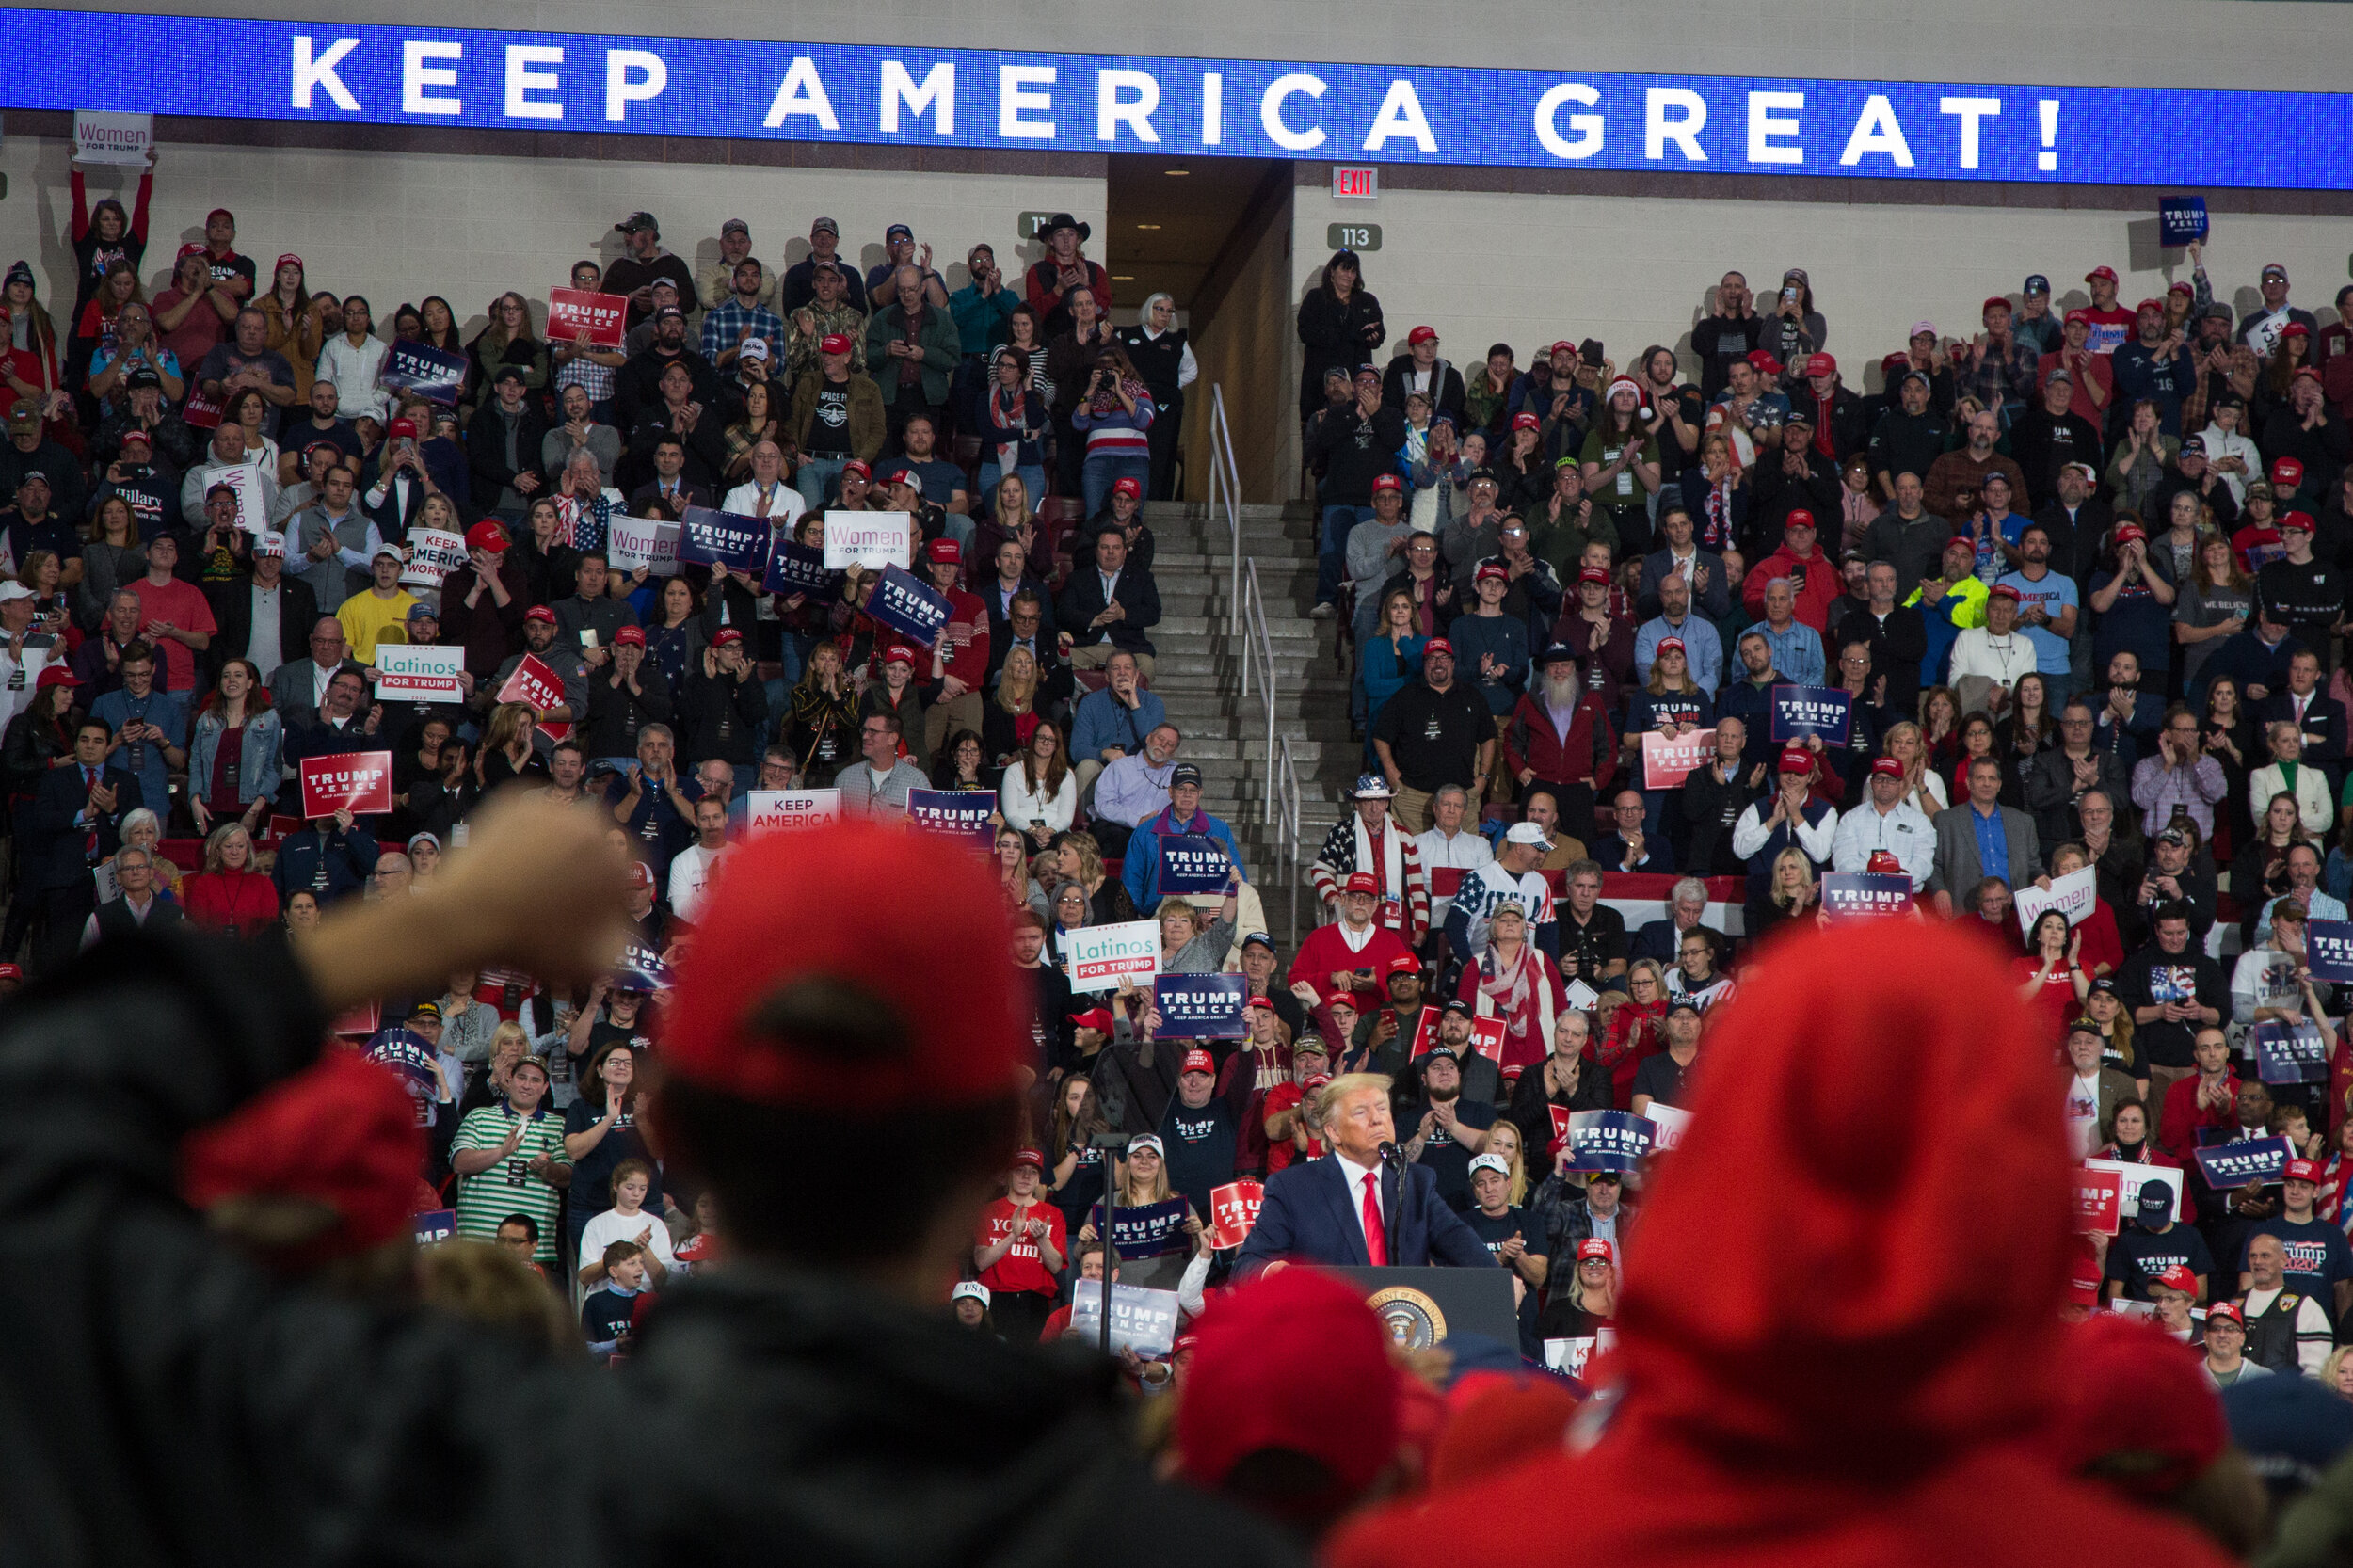 President Trump Speaks At A "Keep America Great" Rally